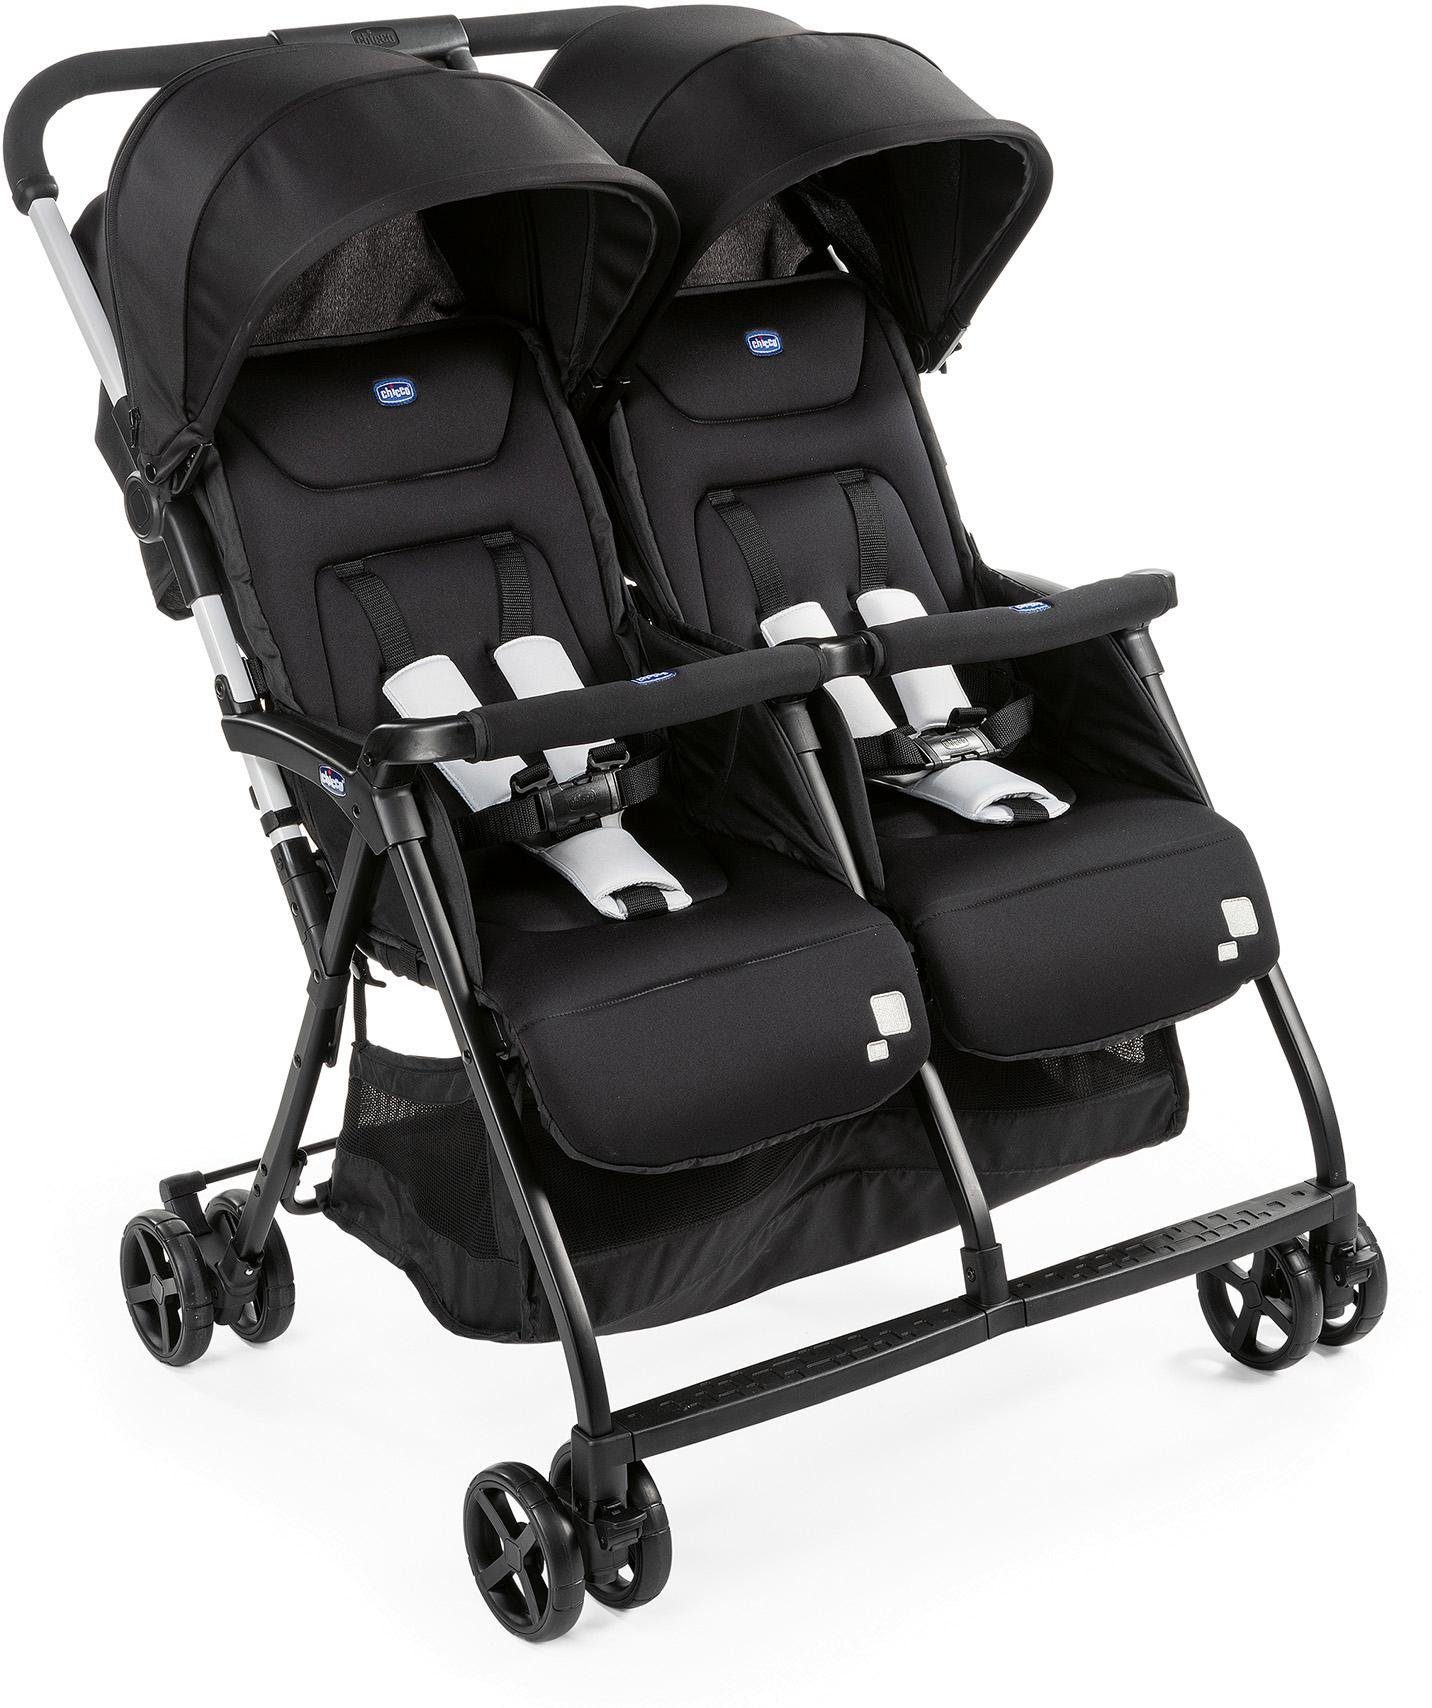 Chicco Zwillingsbuggy OHlalà Twin, Black Night, 15 kg, Zwillingskinderwagen; Kinderwagen für Zwillinge; Buggy Zwillingswagen schwarz Baby Ab Geburt Altersempfehlung